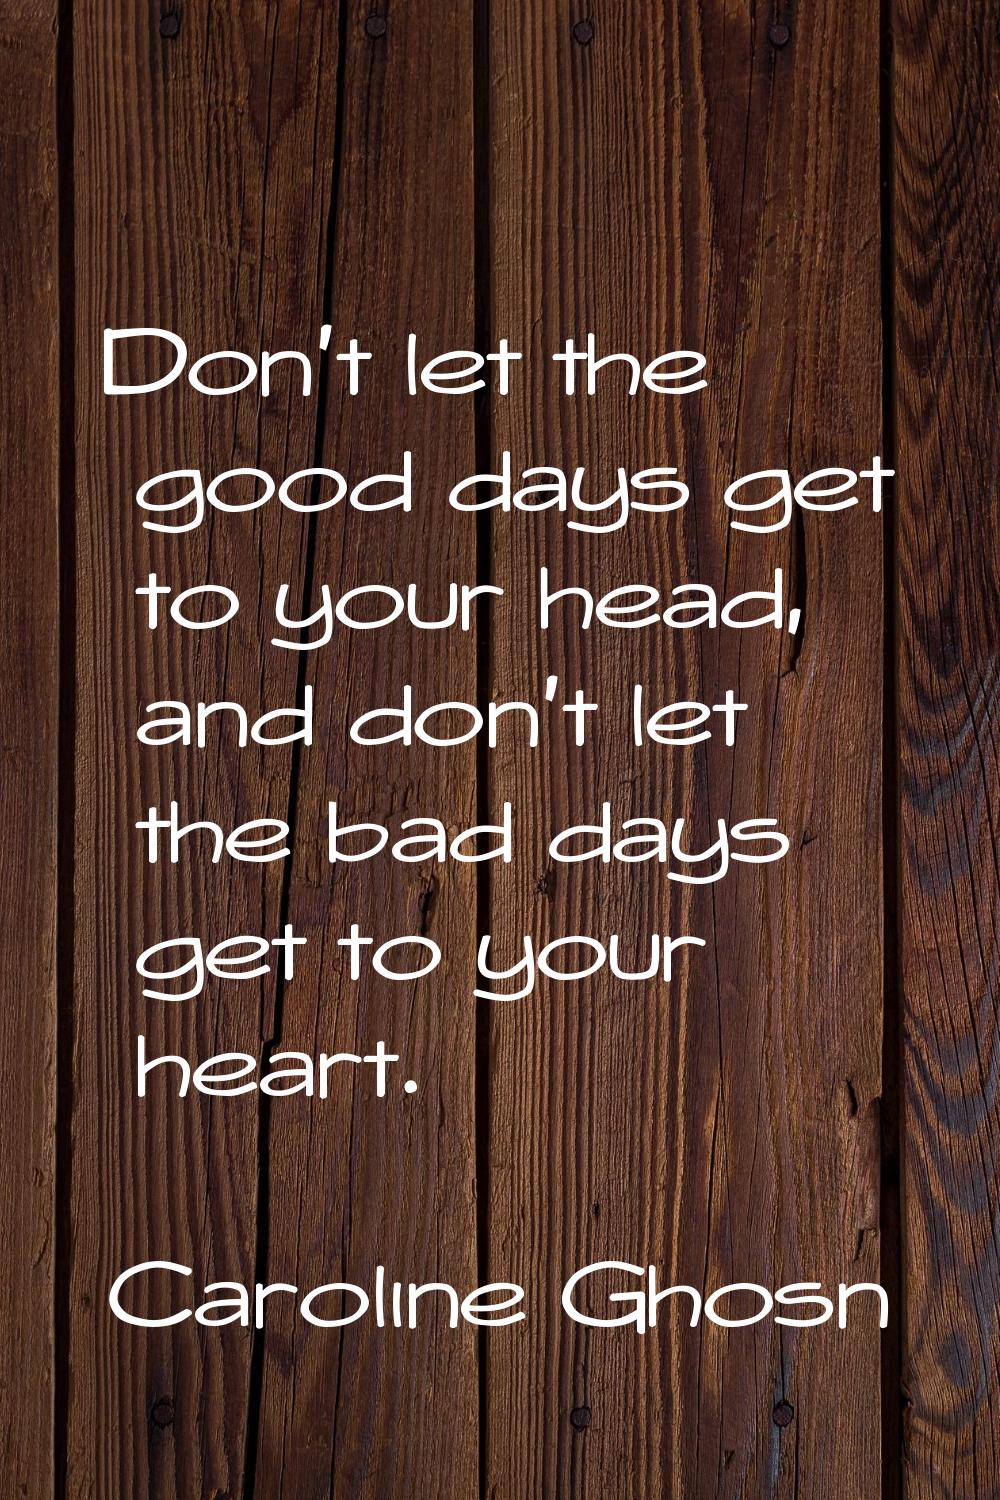 Don't let the good days get to your head, and don't let the bad days get to your heart.